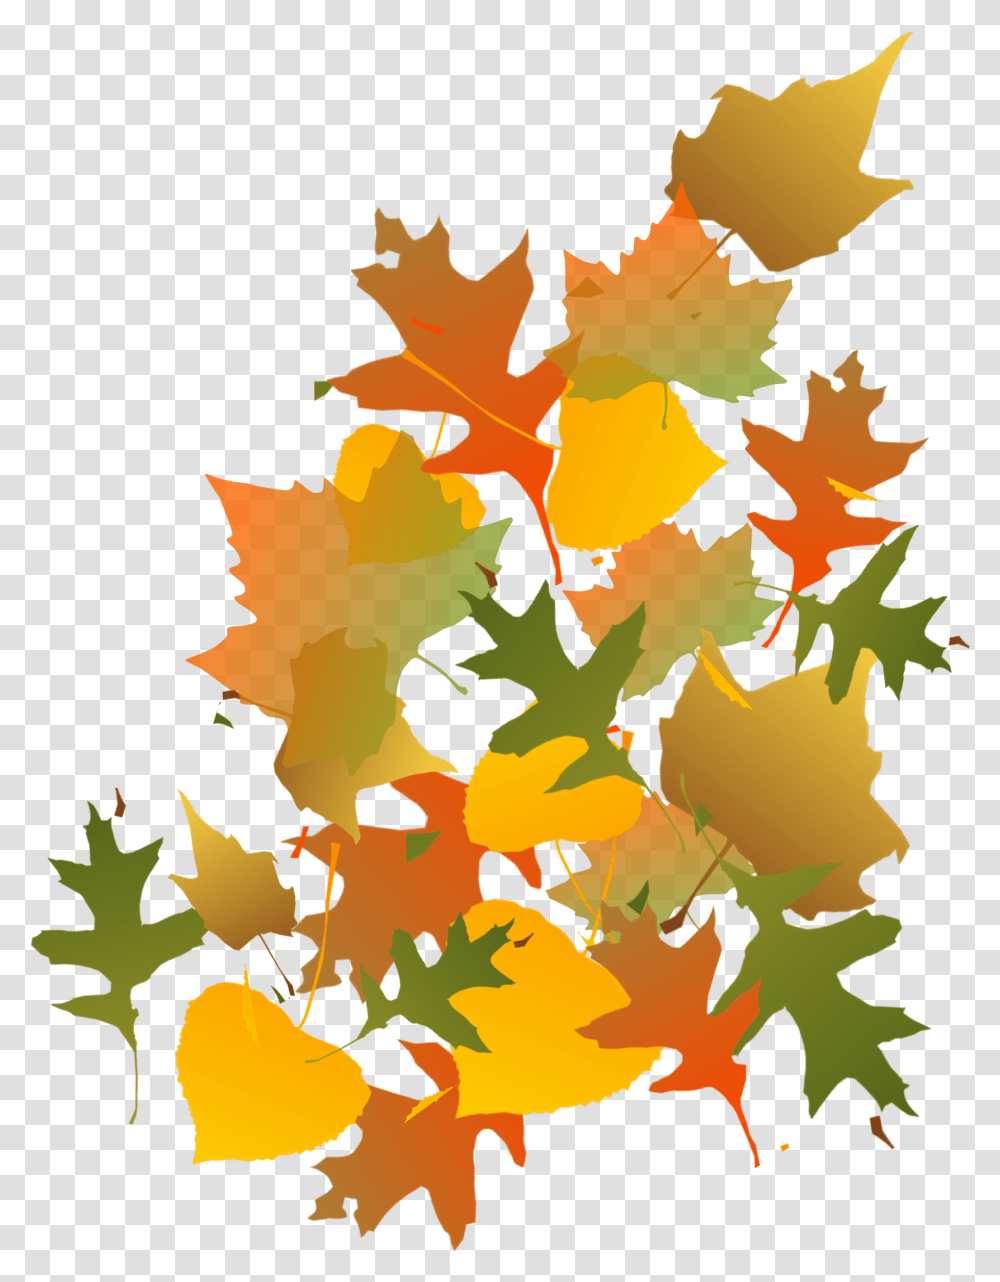 Download Hd Fall Leaves Image Autumn Leaves Clip Art Autumn Leaves Clip Art, Leaf, Plant, Tree, Maple Transparent Png